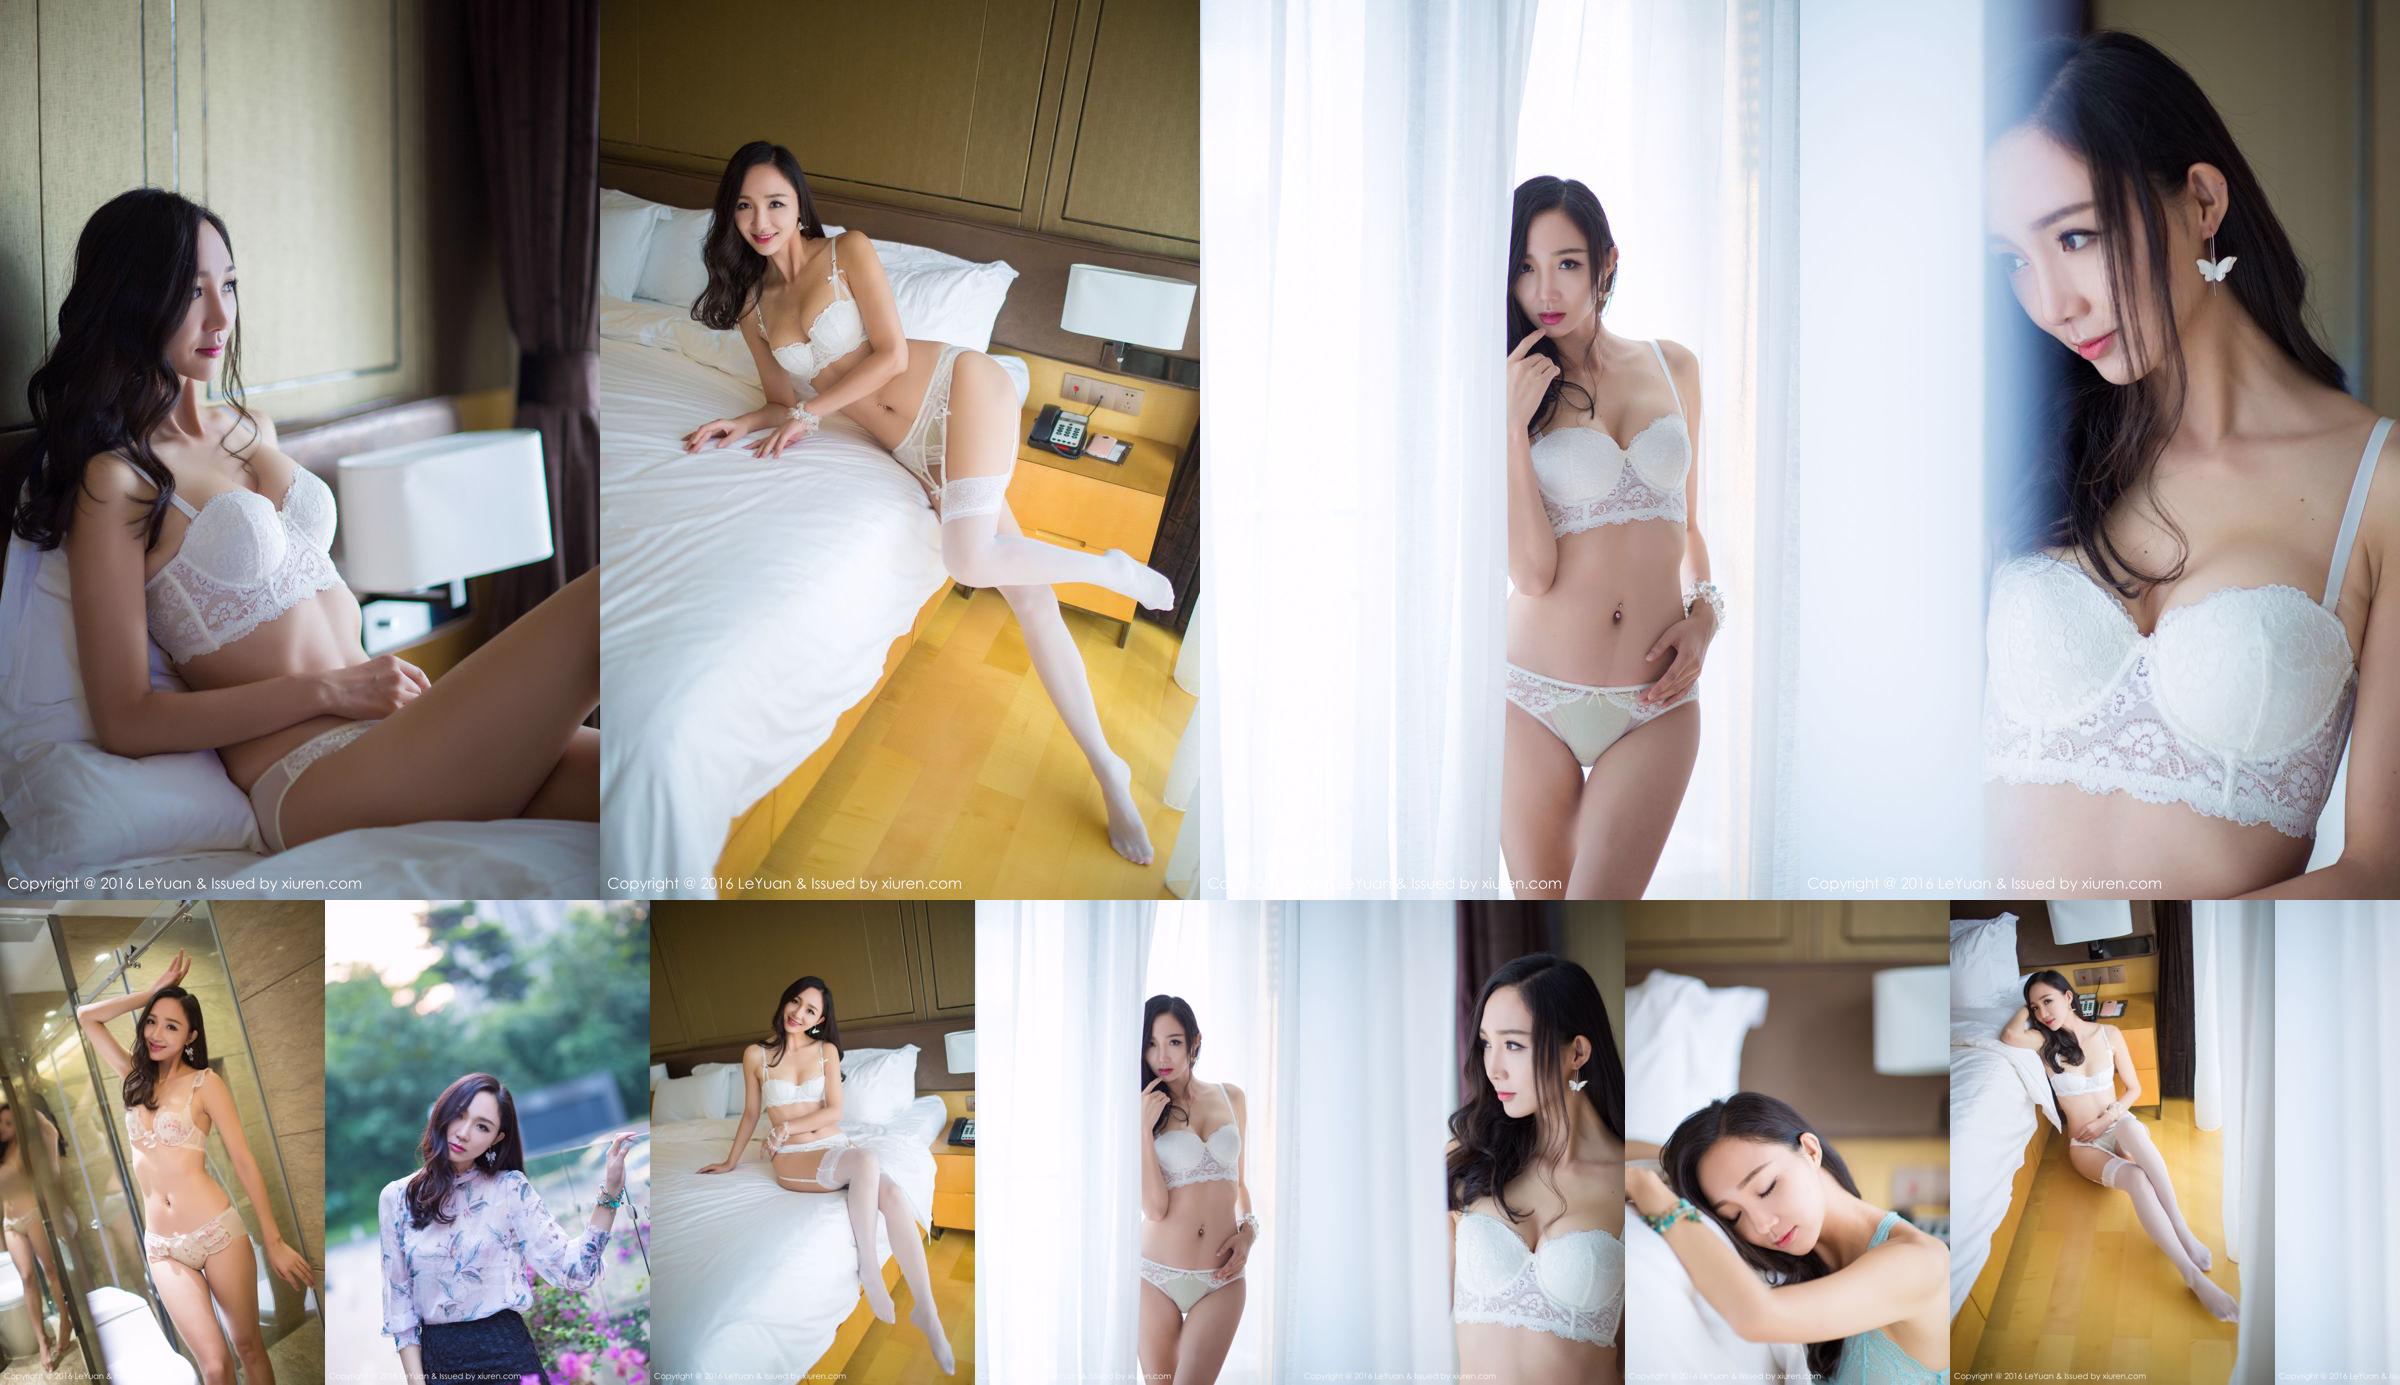 Beibei maggie "Longues belles jambes, grande figure gracieuse" [Star Paradise LeYuan] Vol.009 No.4760f9 Page 1